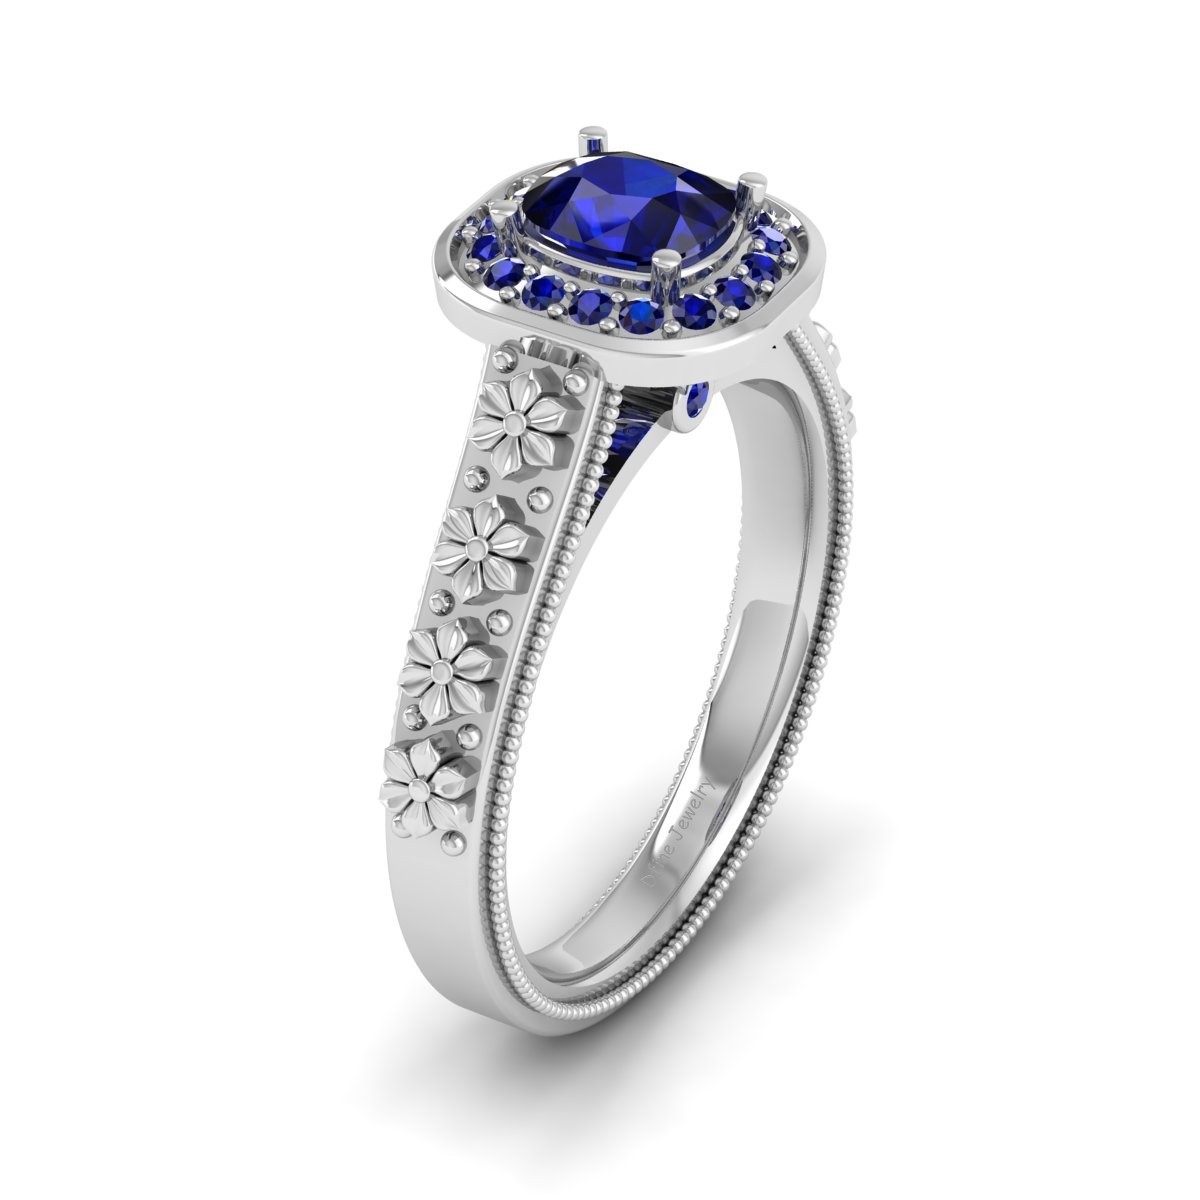 Dfj - Solid 925 sterling silver cushion cut blue sapphire halo engagement ring jewelry